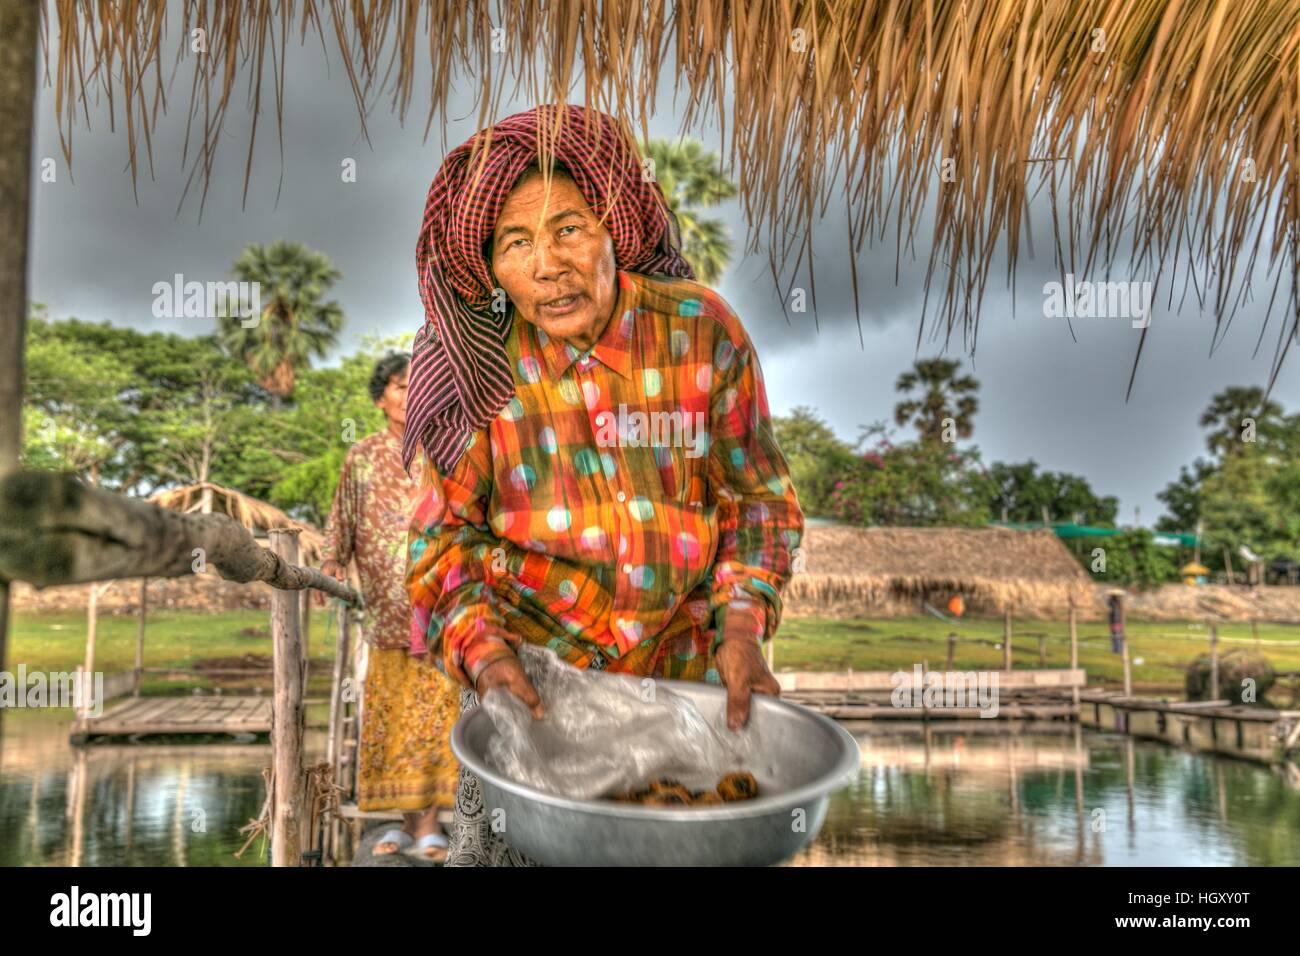 A vendor selling dessert during a picnic on Tonl Bati, a lake and picnic area that has bamboo shacks built over the water. Stock Photo